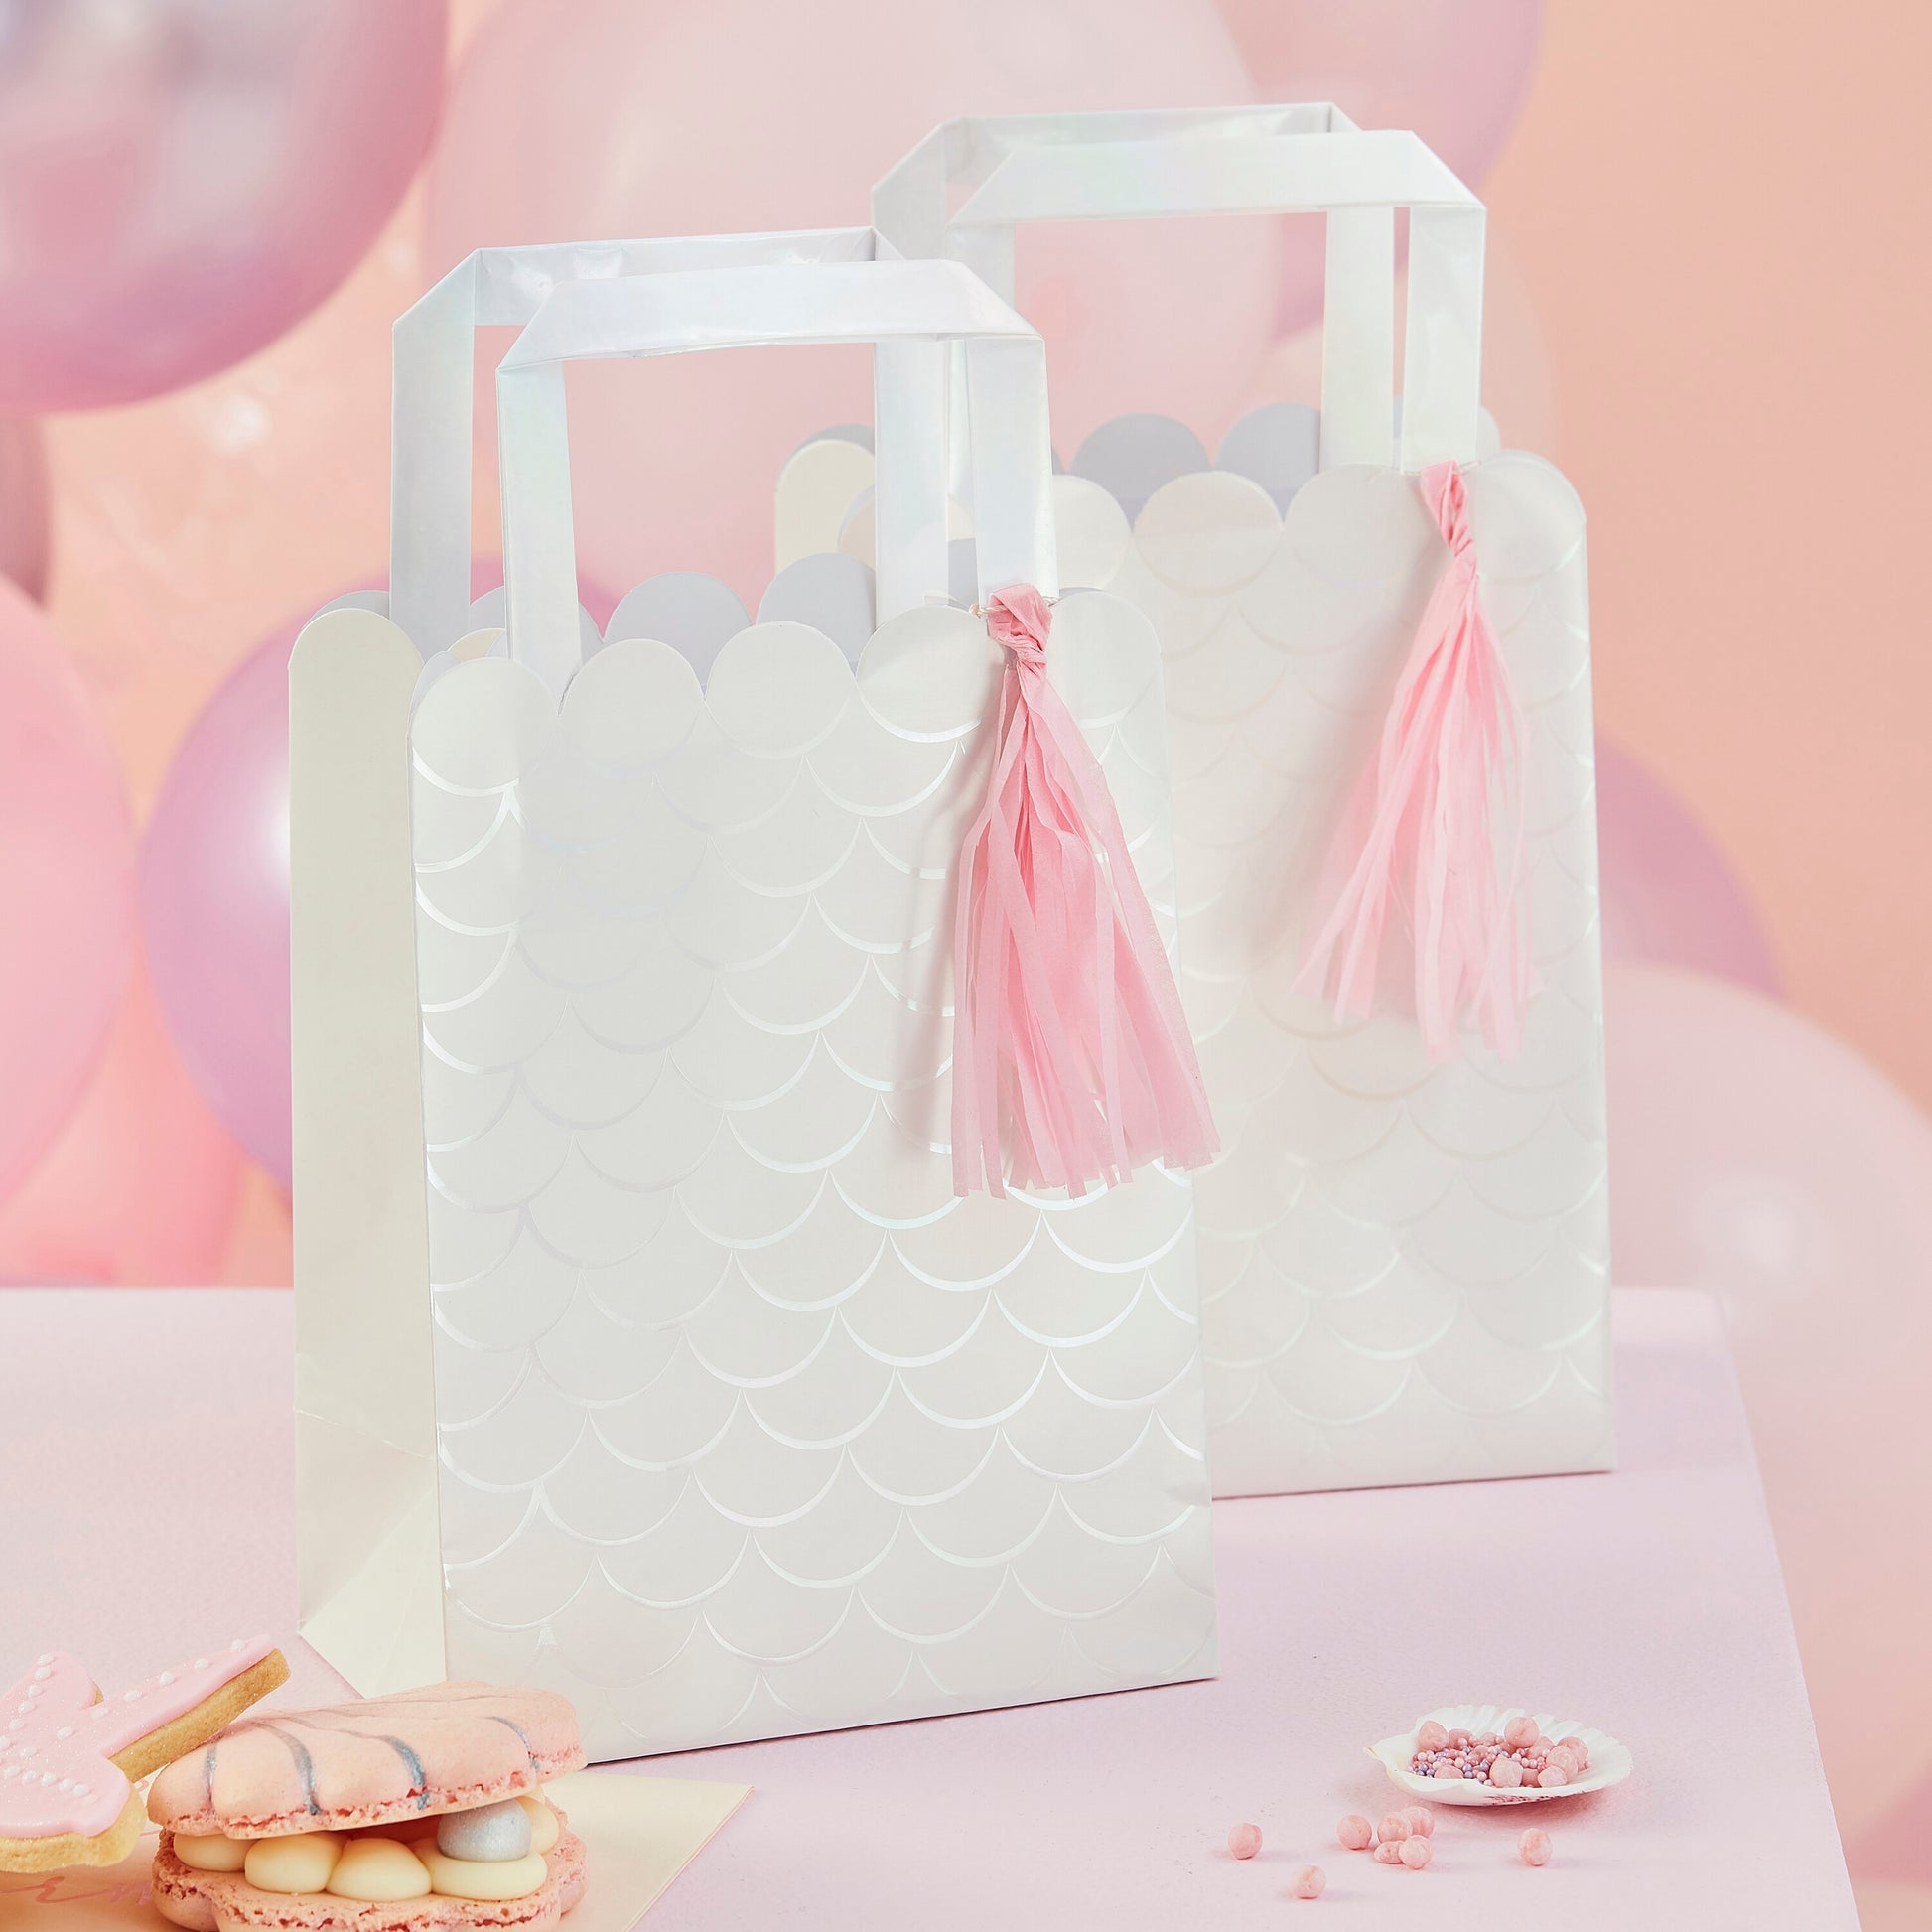 Iridescent and Pink Party Bags with Tassels - Muddy Boots Home UK